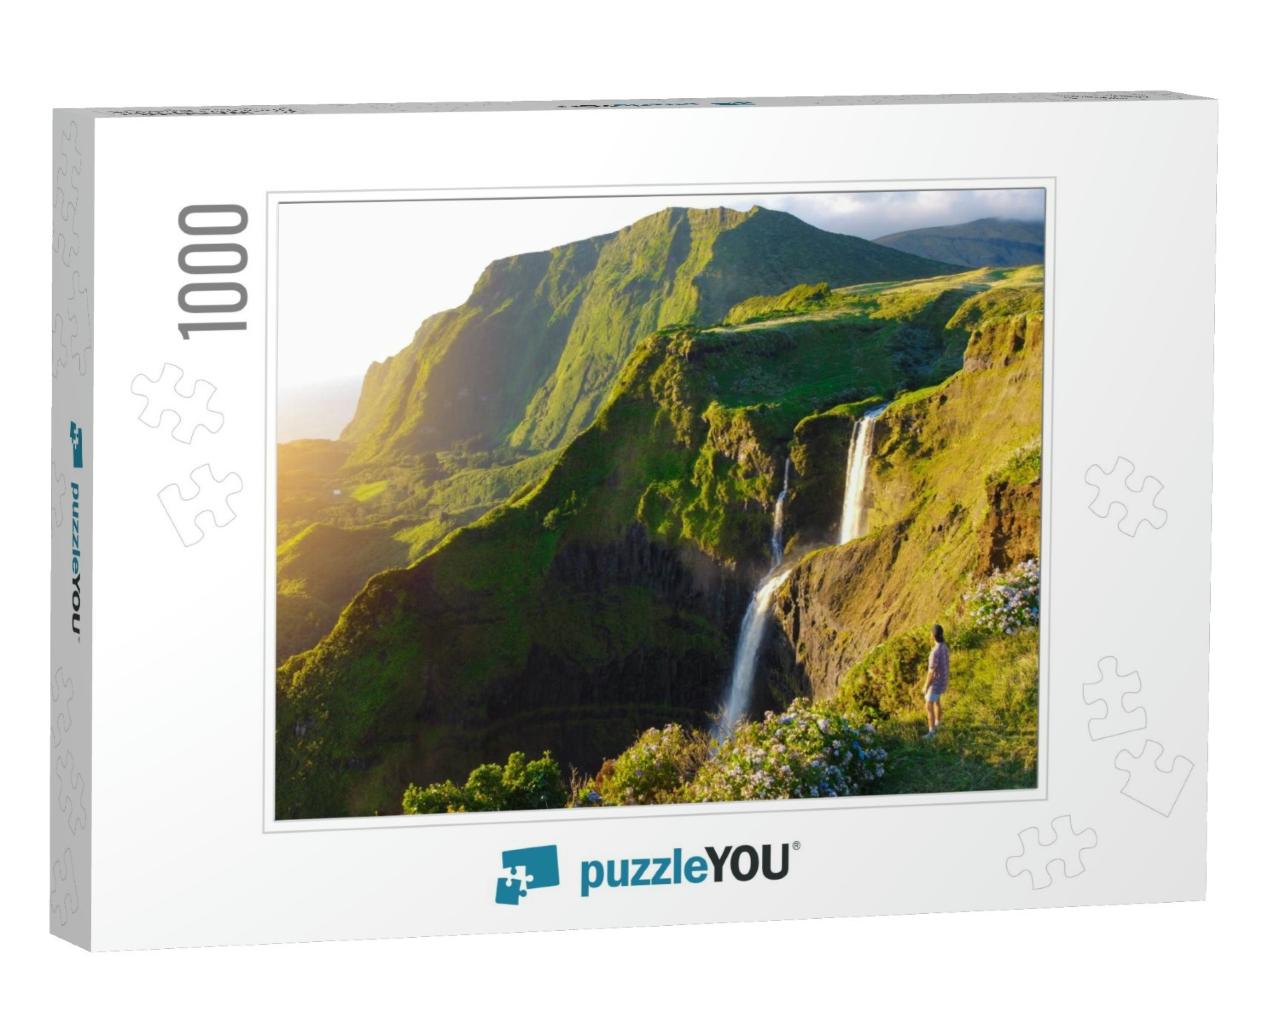 Lush Paradise Views Over Green Valley, Dramatic Cliffs &... Jigsaw Puzzle with 1000 pieces